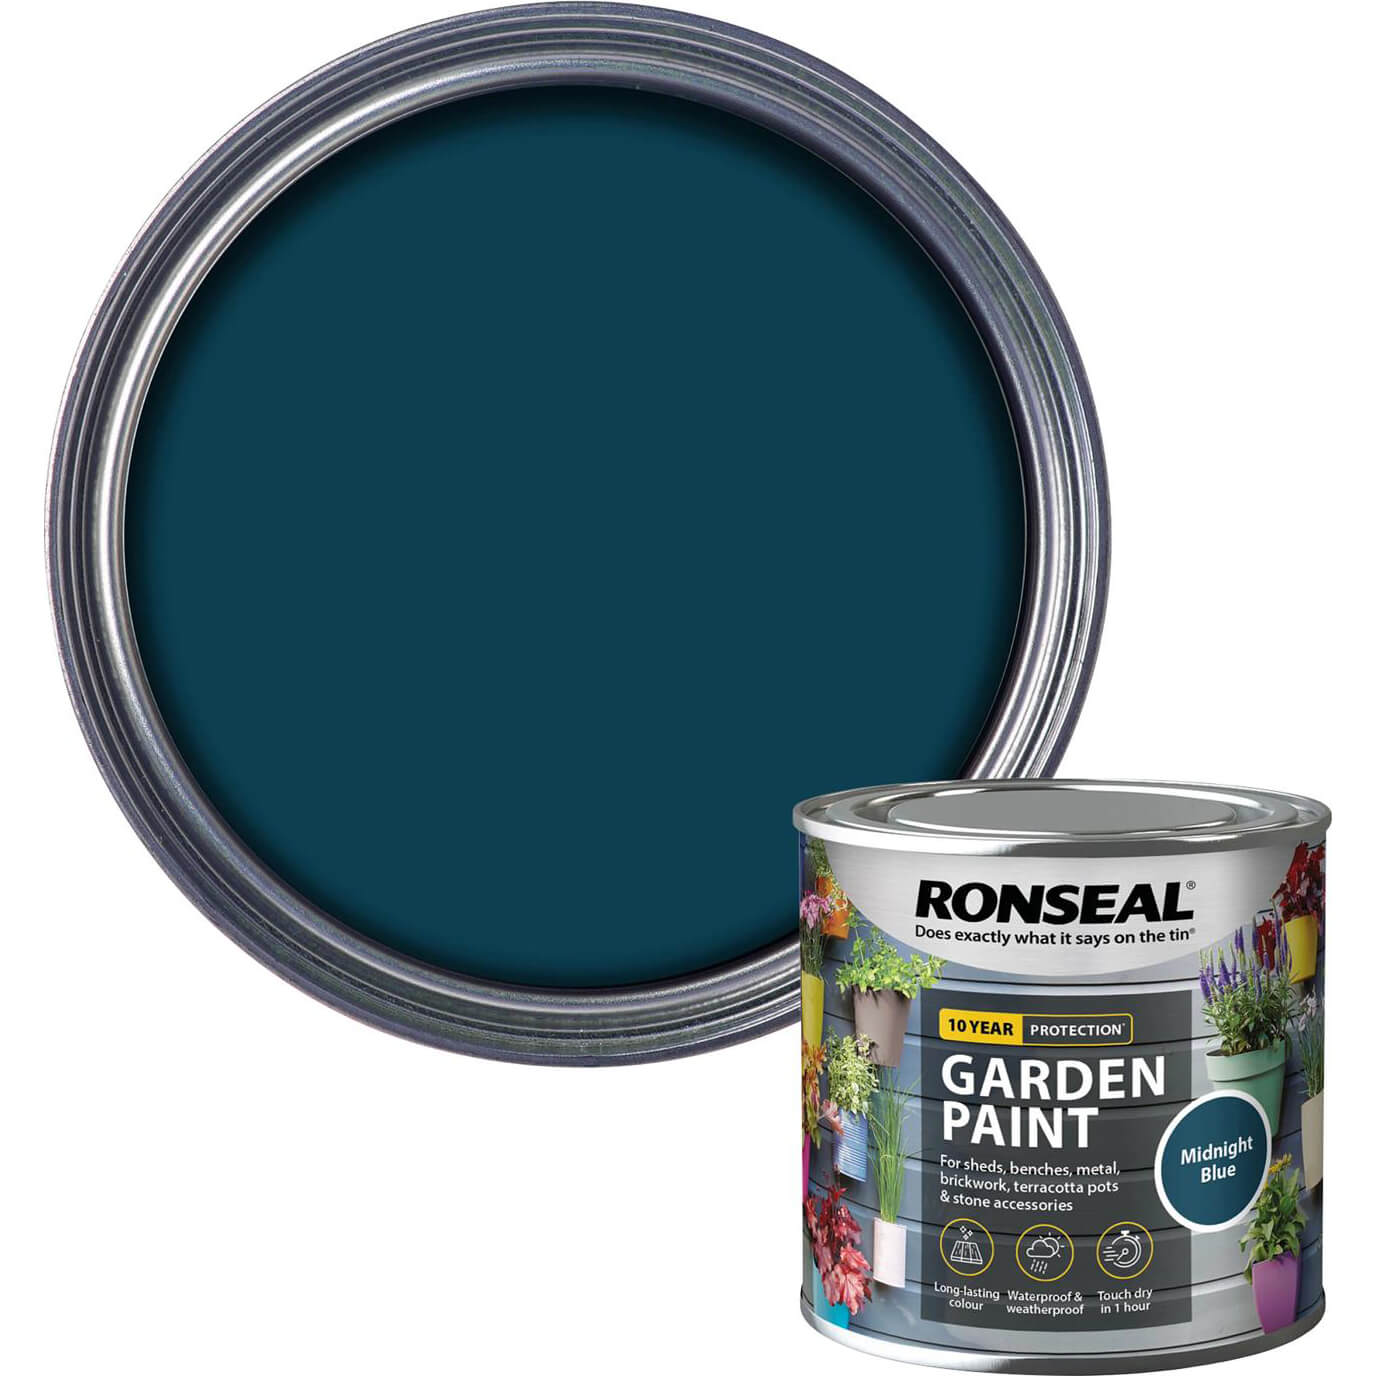 Image of Ronseal General Purpose Garden Paint Midnight Blue 250ml